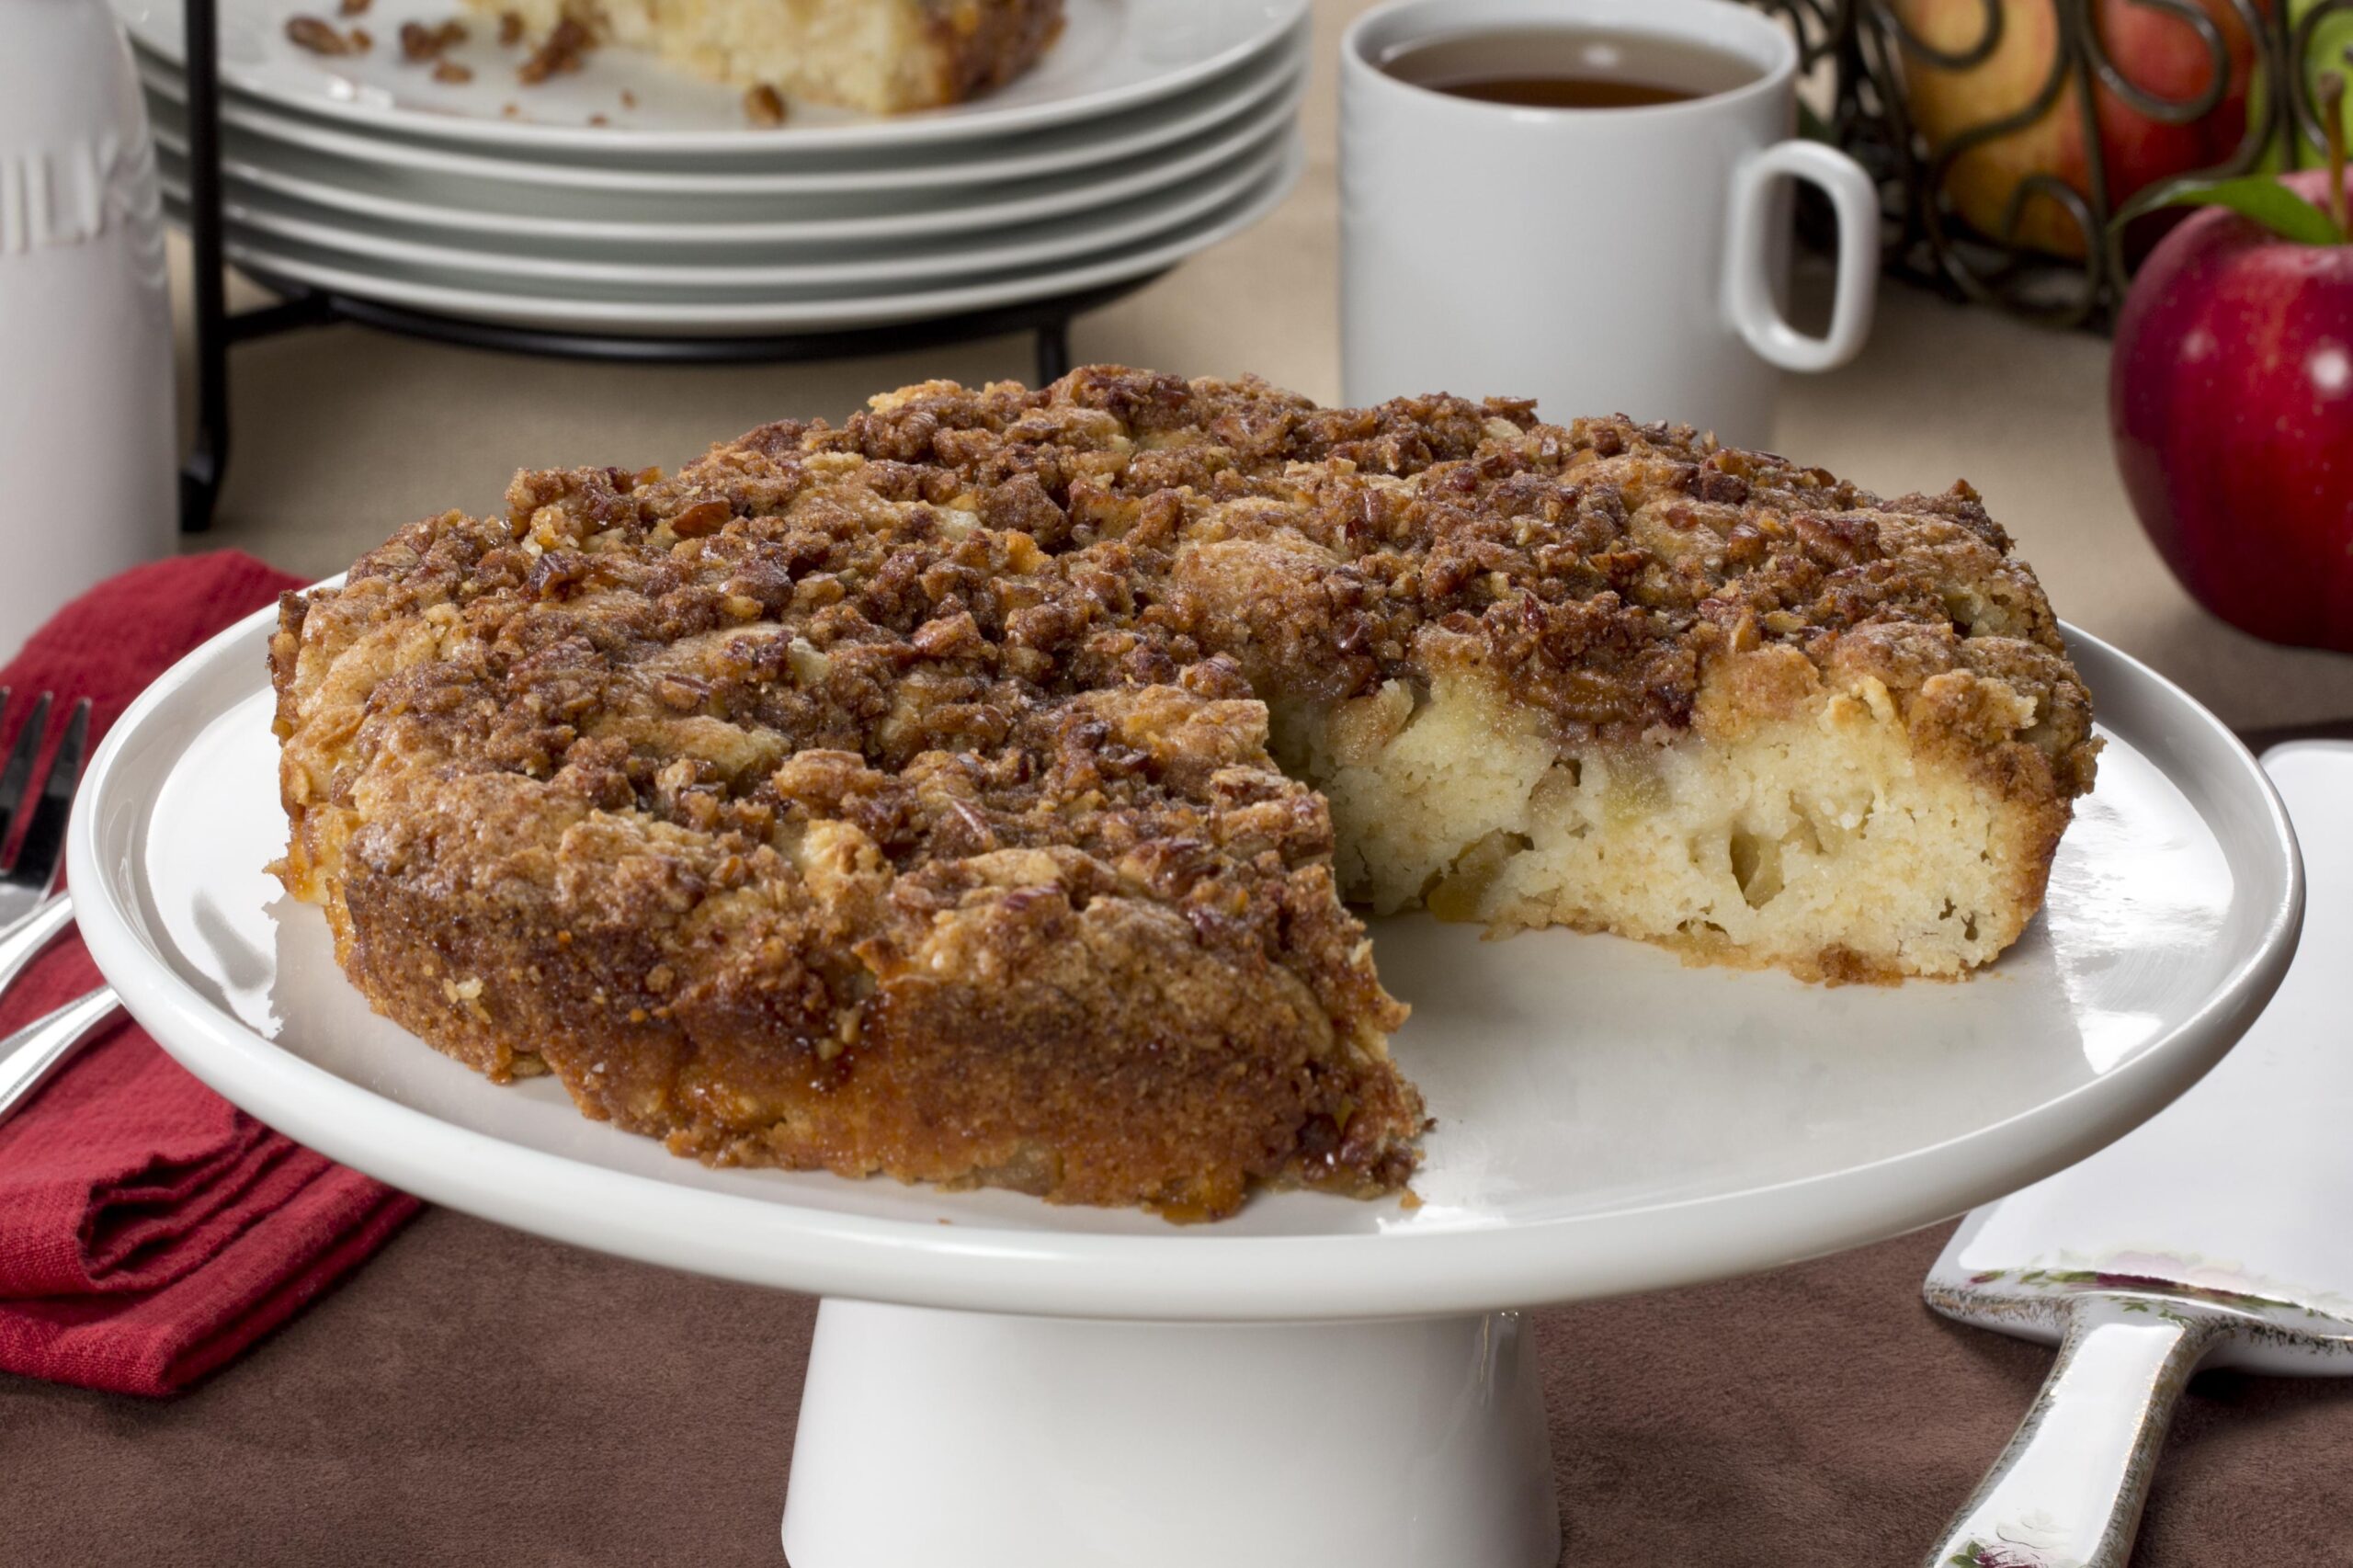  Short on time? This microwave apple coffee cake has got your back.